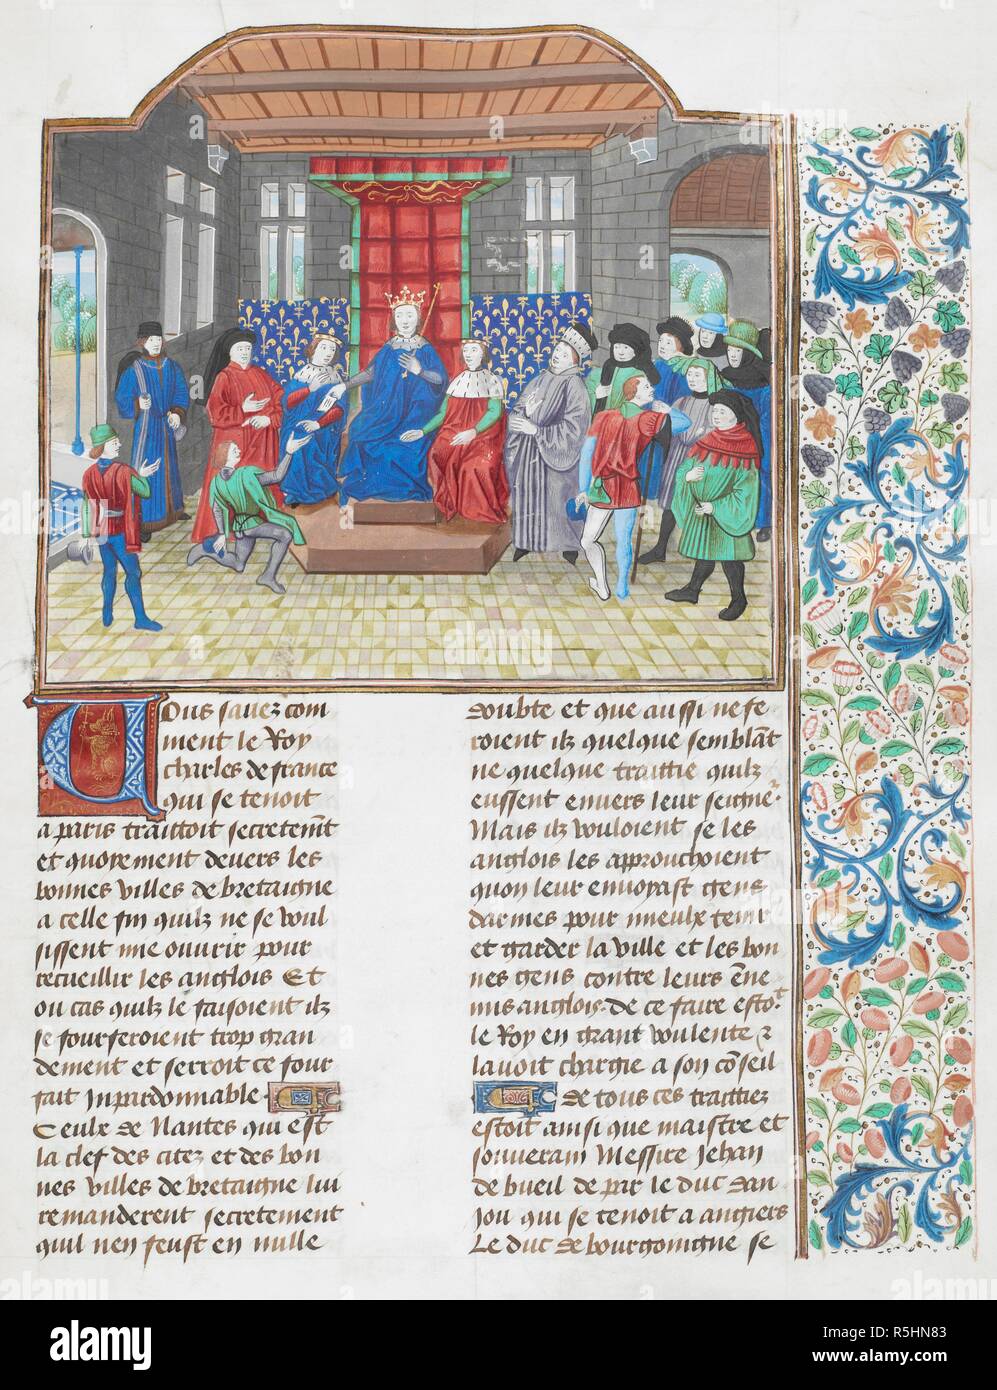 The court of Emperor Charles V. Text and floral border. Chroniques. Netherlands, S. Last quarter of the 15th century, before 1483. Source: Royal 18 E. I f.121. Language: French. Author: FROISSART, JEAN. Stock Photo